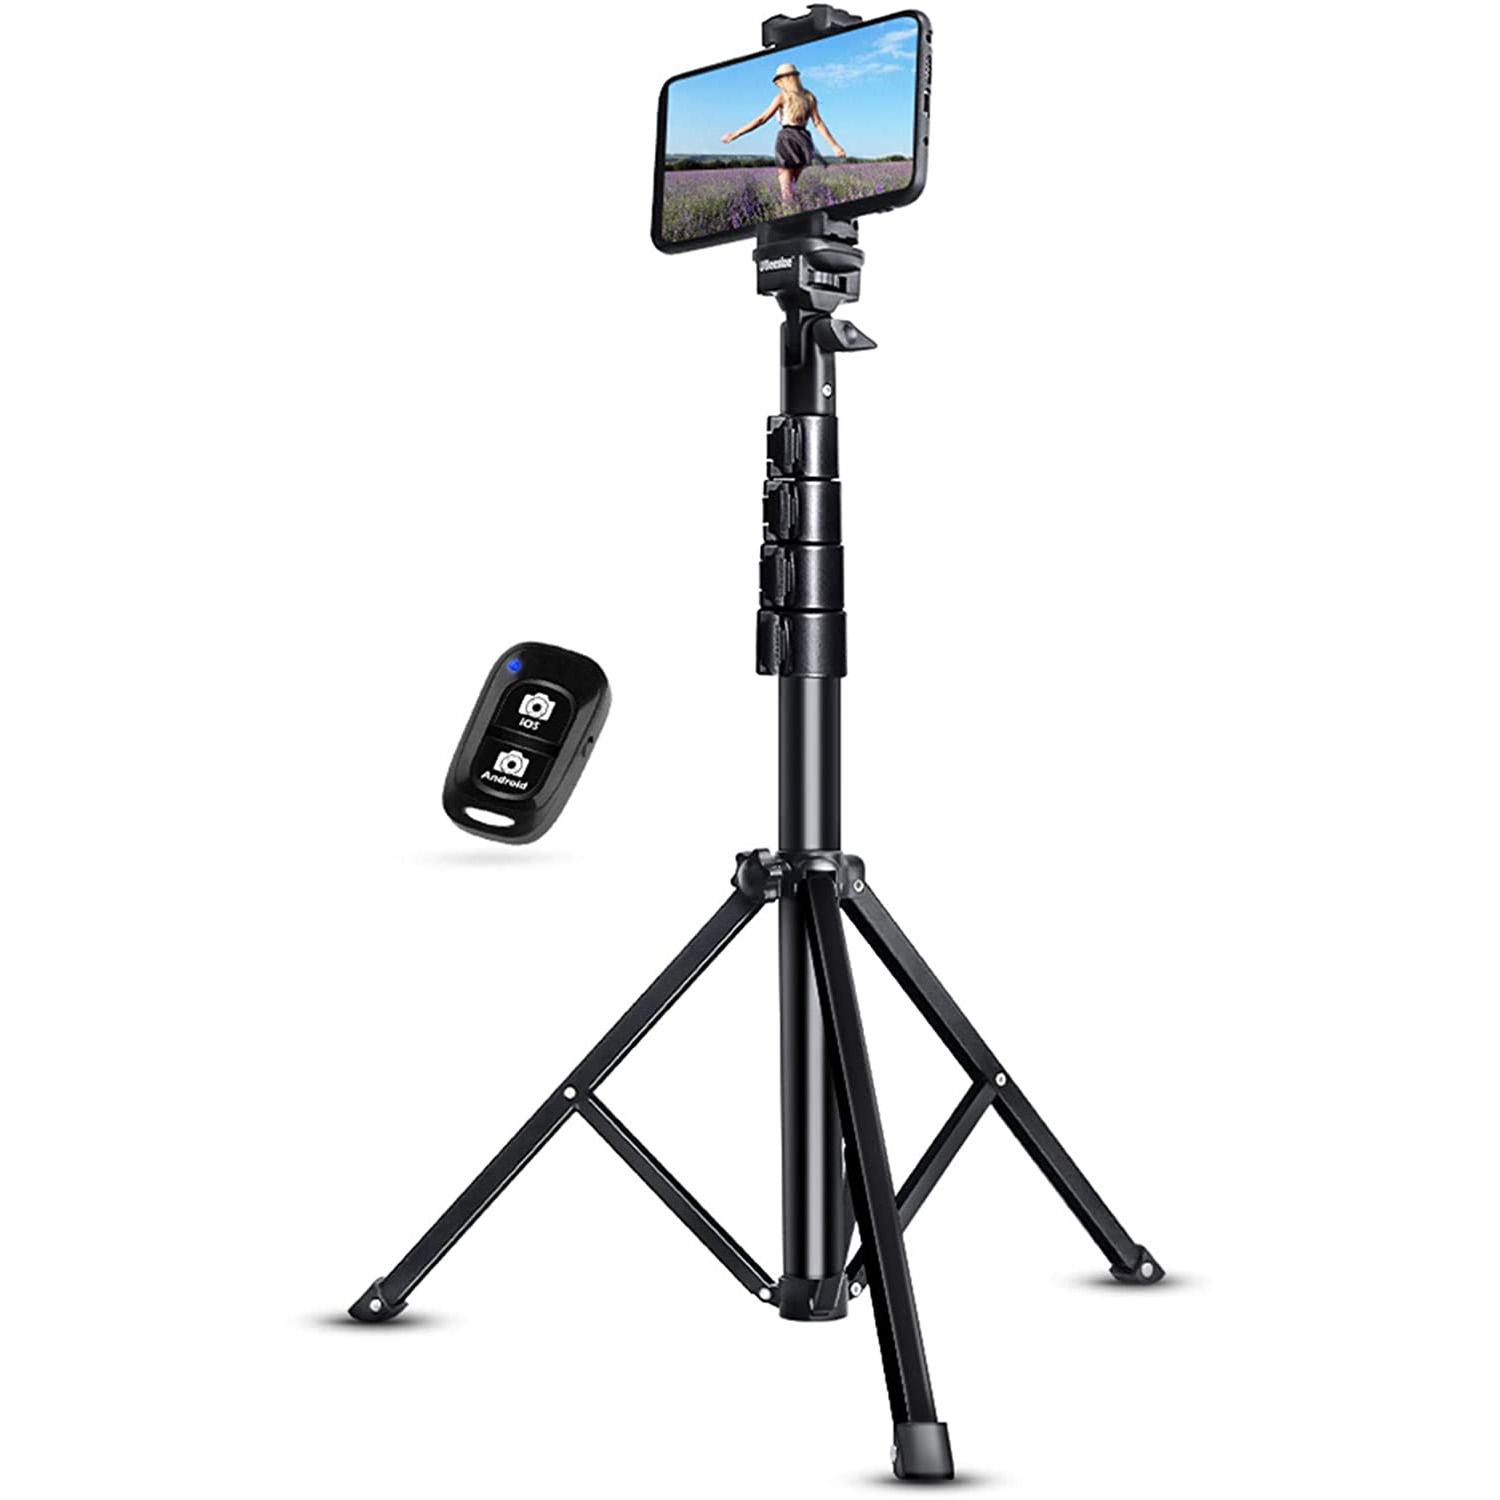 51in Selfie Stick Tripod Stand for $13.07